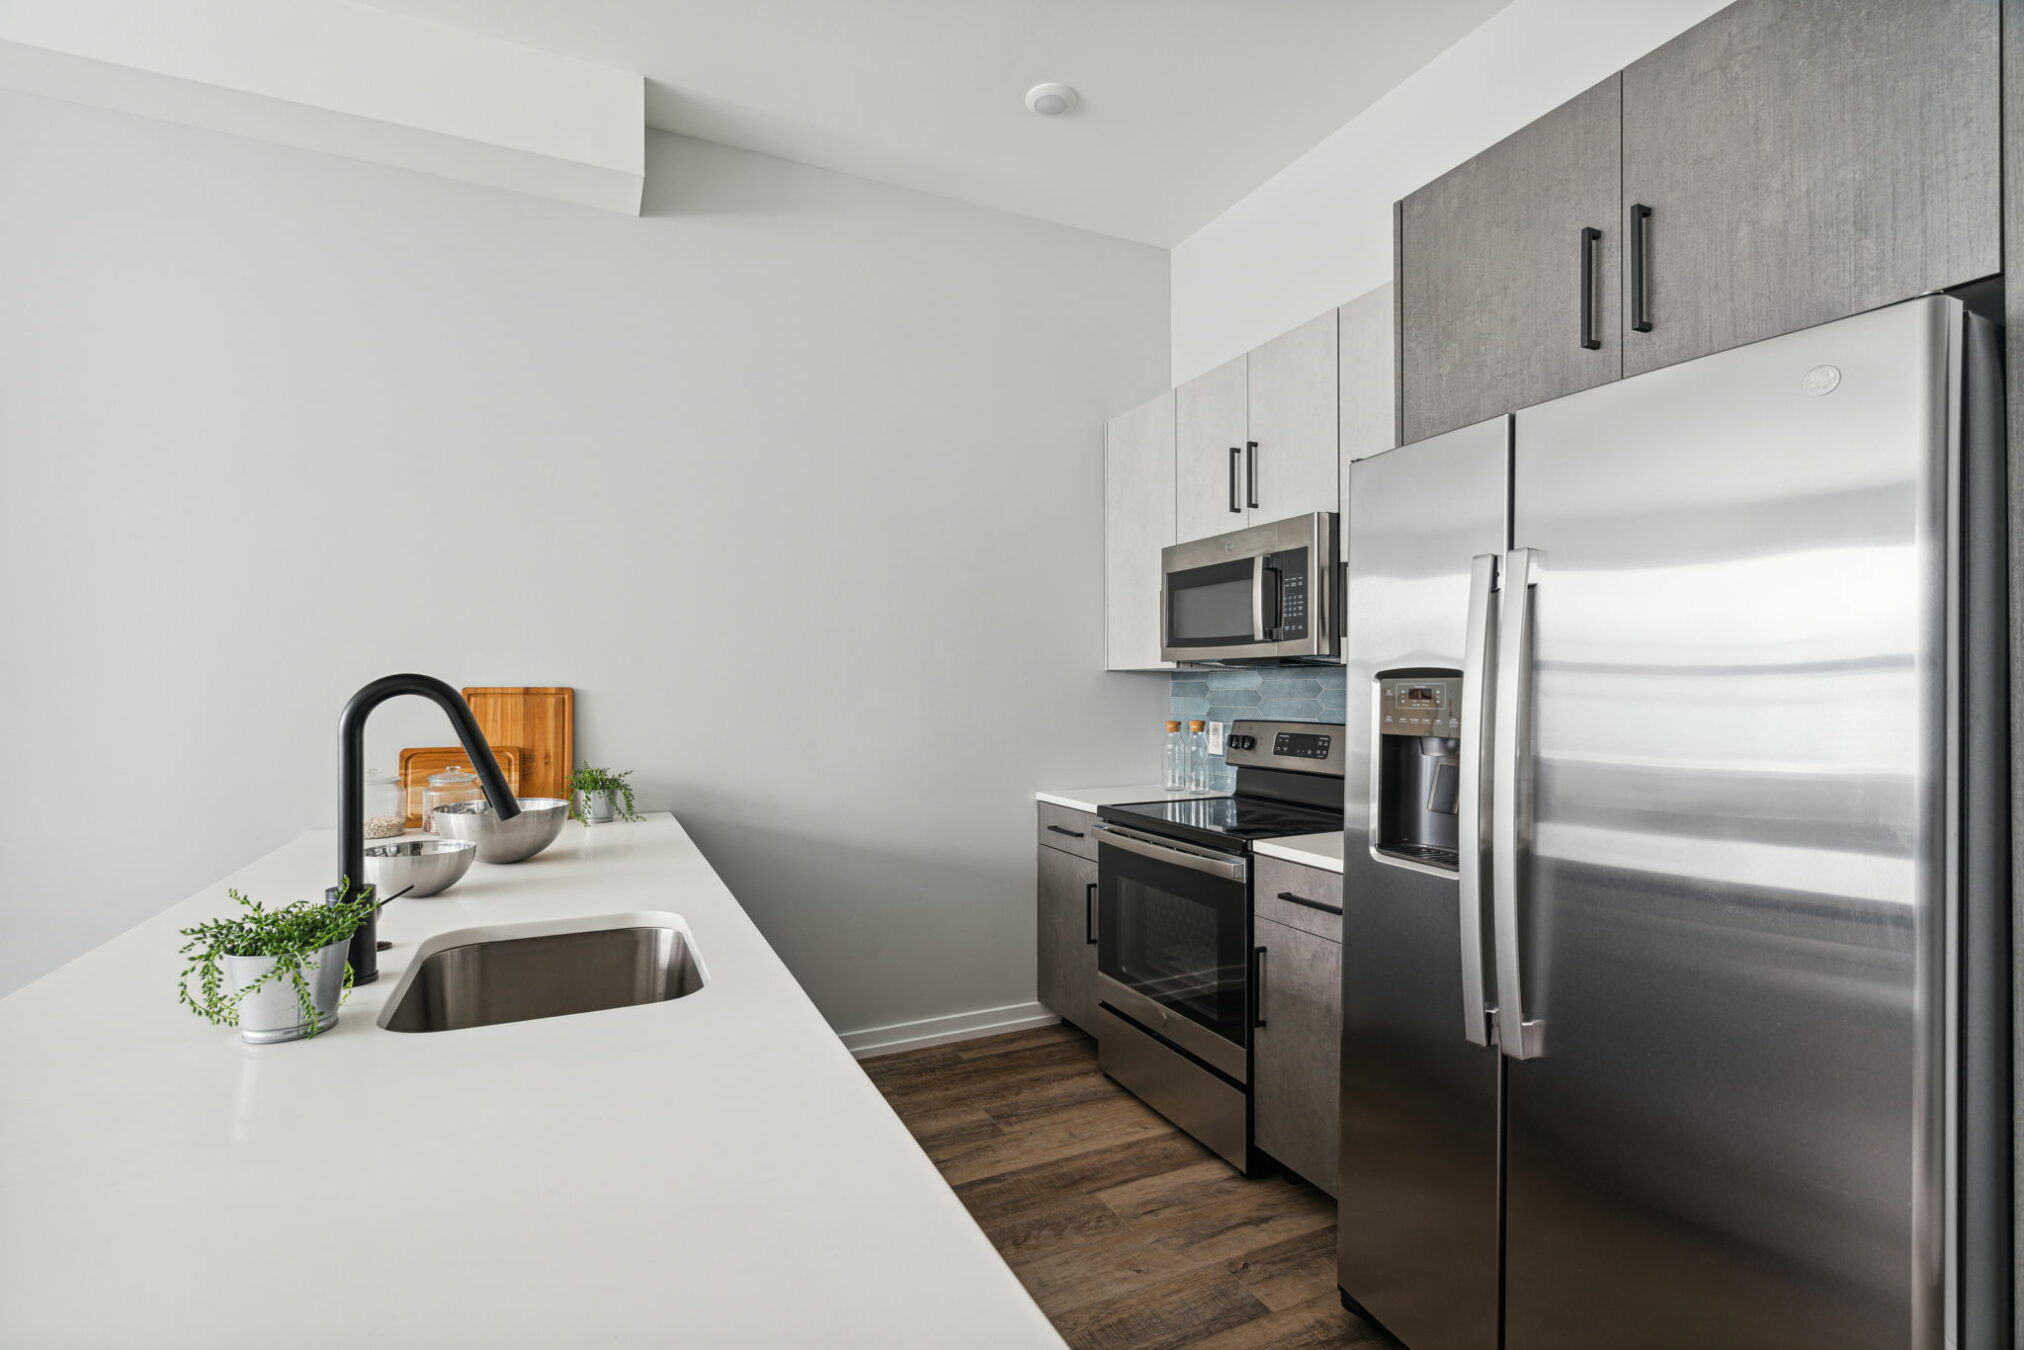 Property Photo For 2233 N 7th St, Unit 221